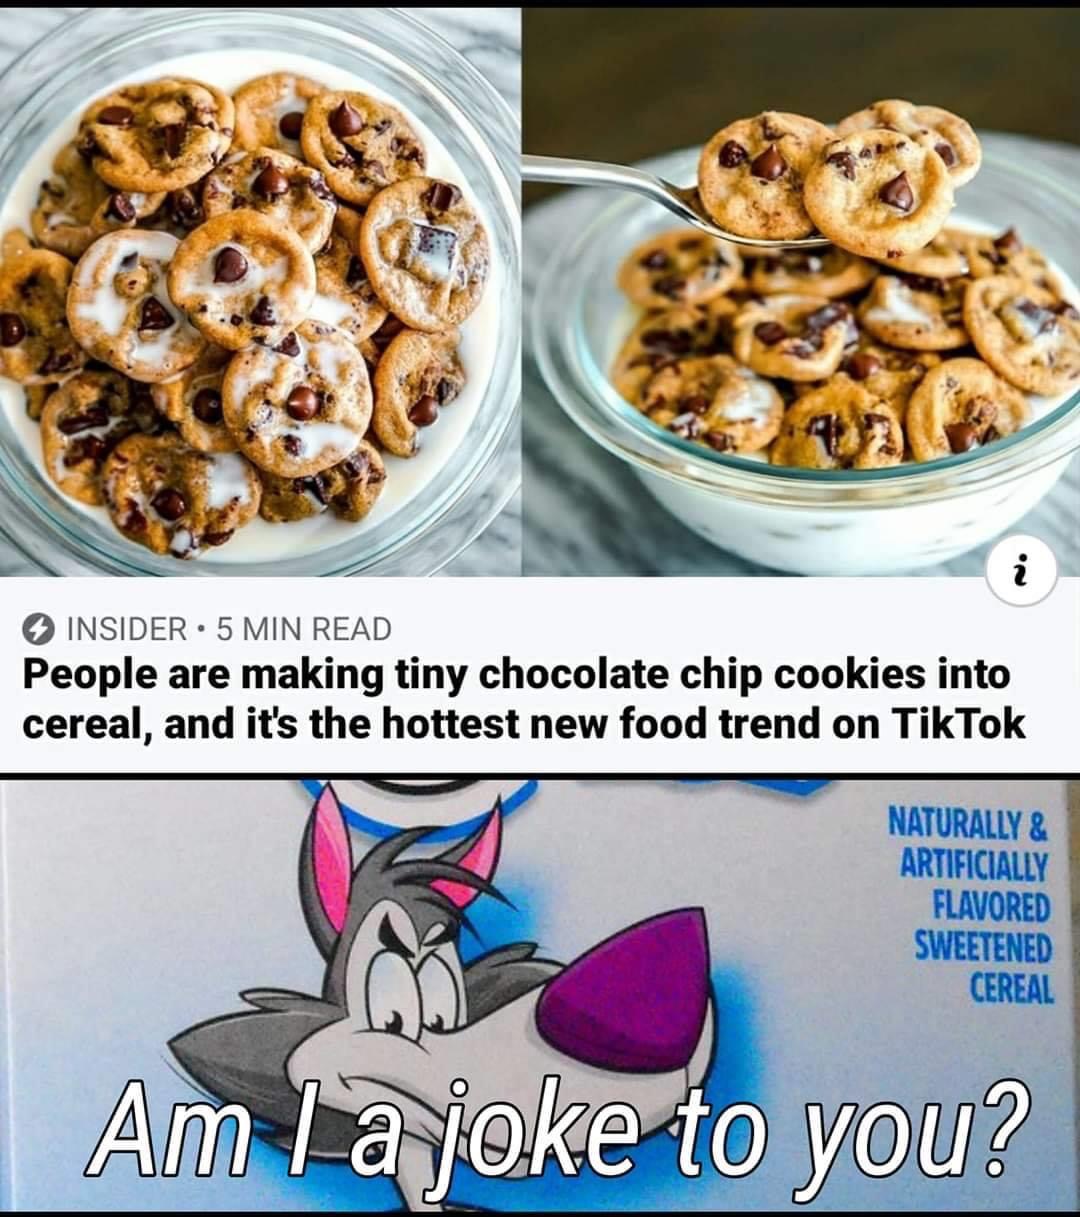 chocolate chip cookie cereal - . i Insider 5 Min Read People are making tiny chocolate chip cookies into cereal, and it's the hottest new food trend on TikTok Naturally & Artificially Flavored Sweetened Cereal Am la joke to you?